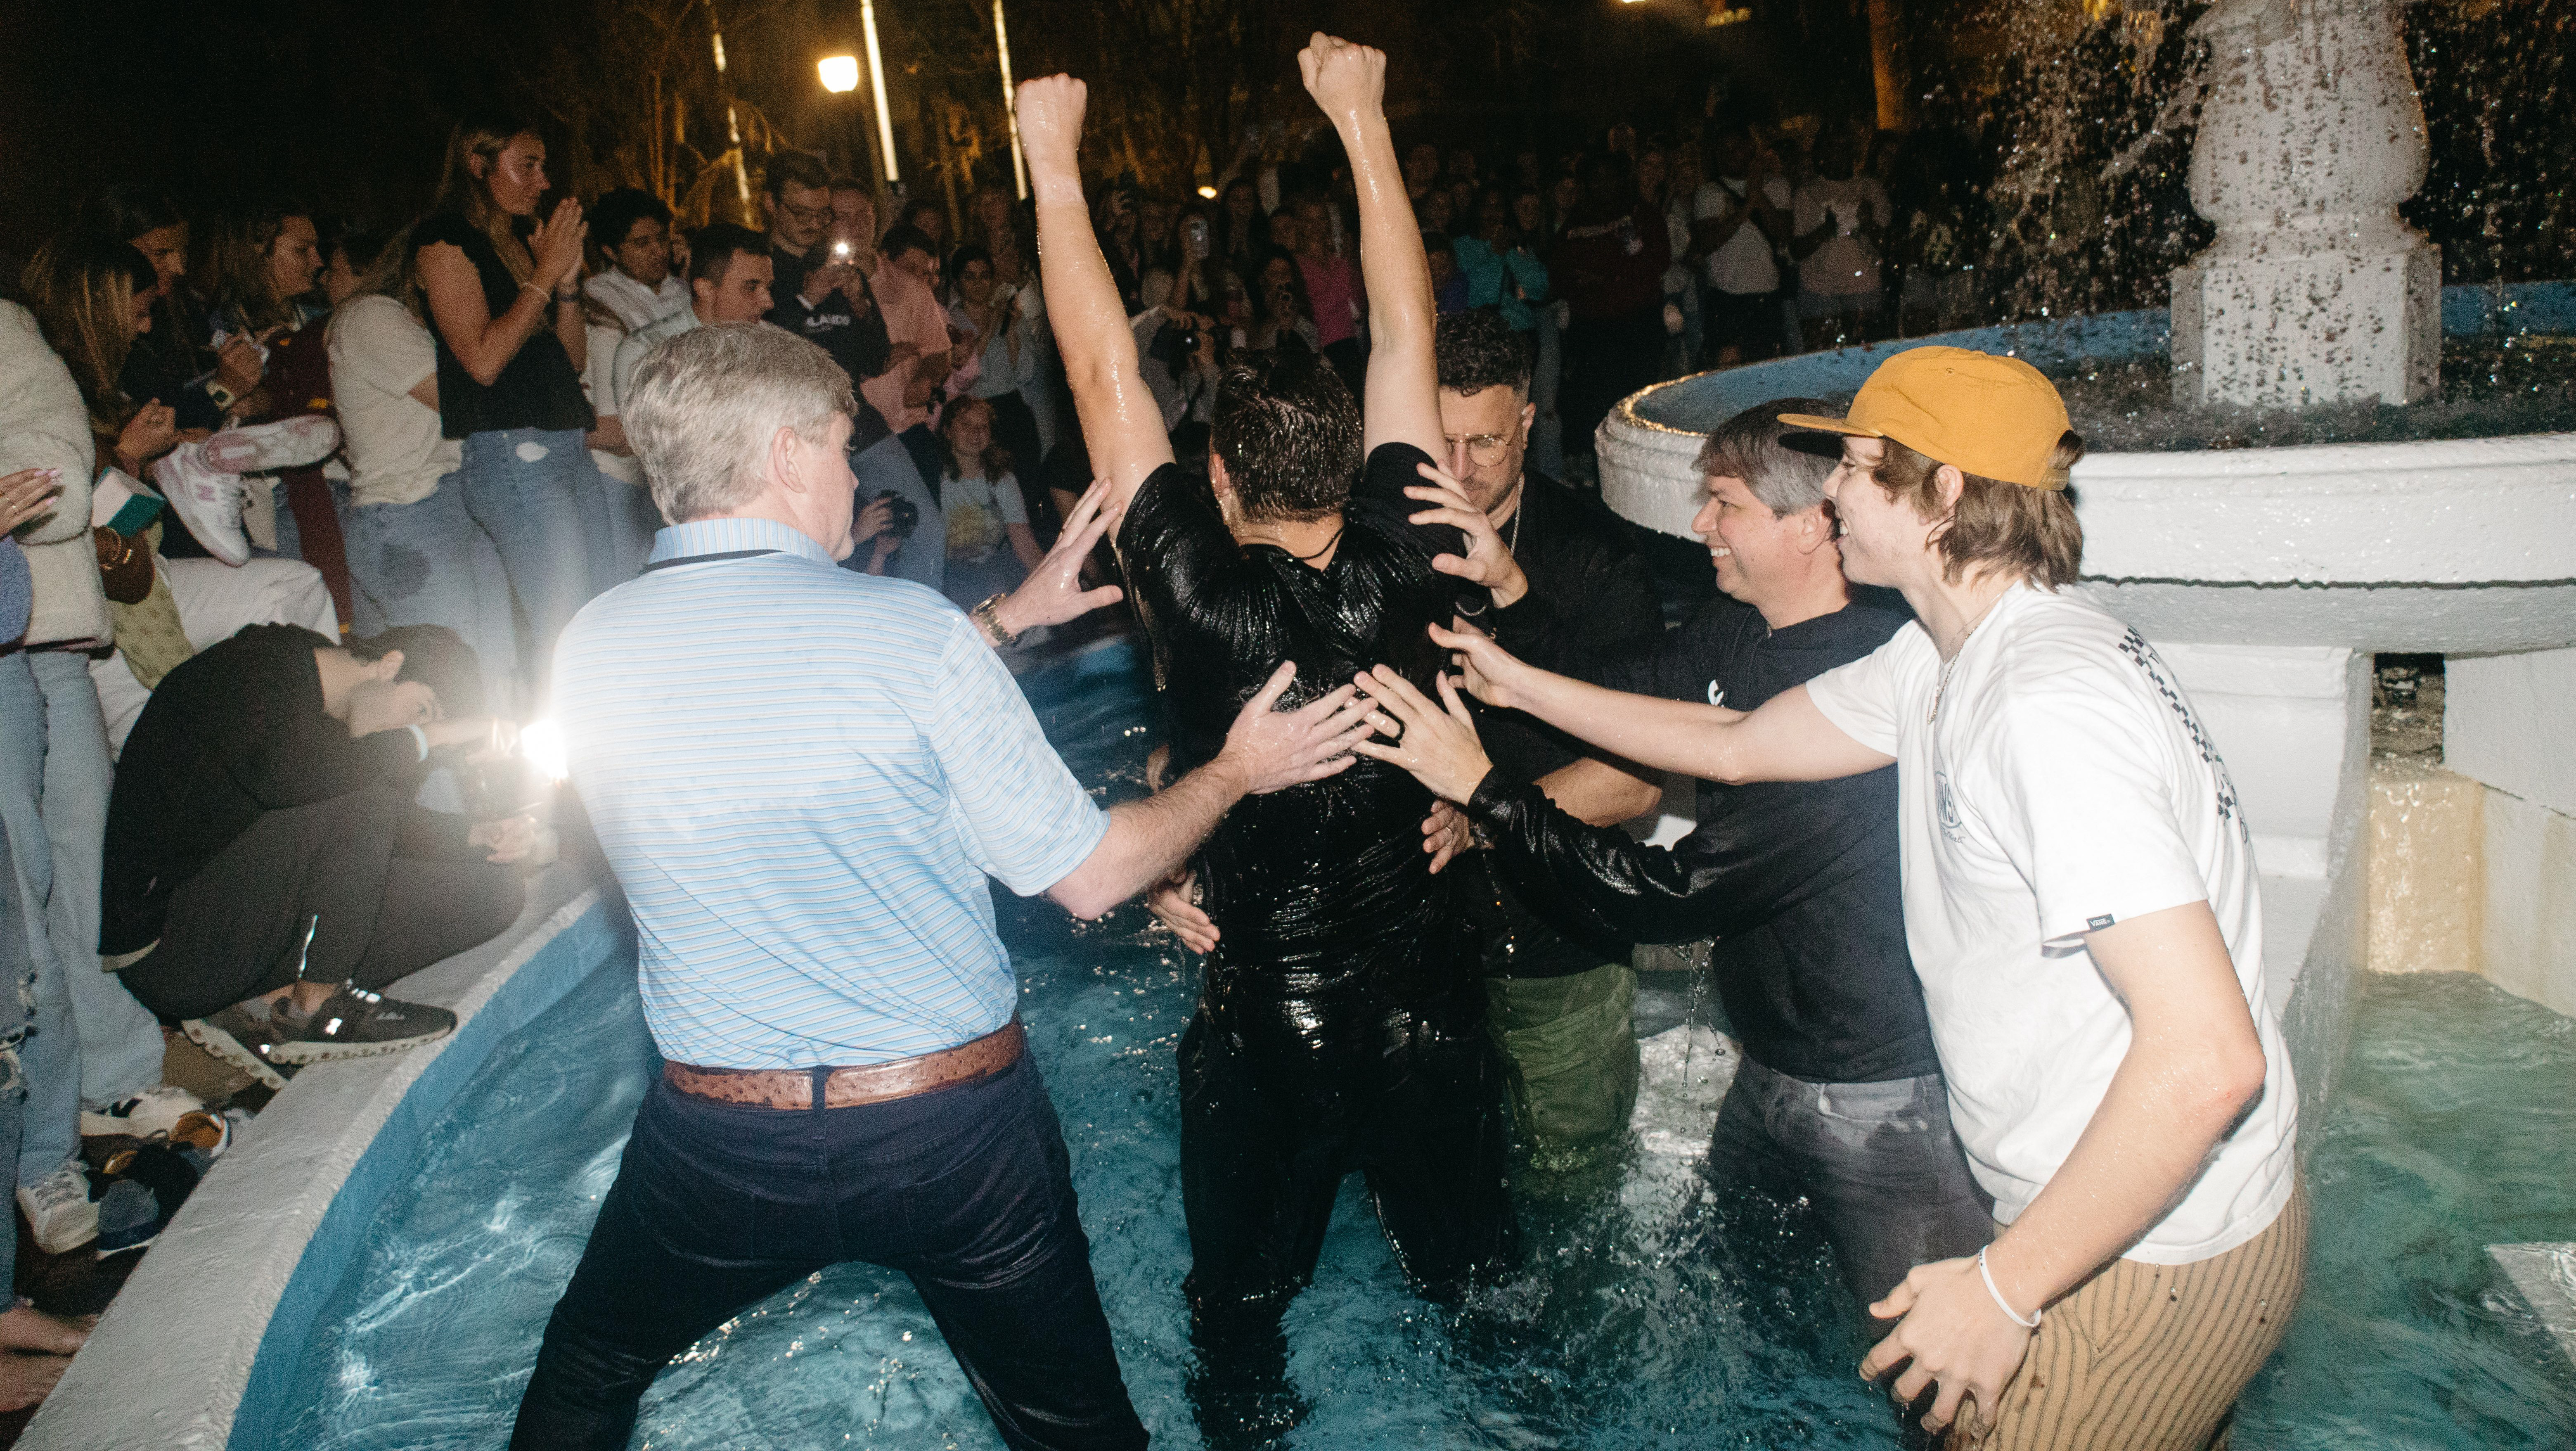 Four men helping to baptize a young man in a fountain